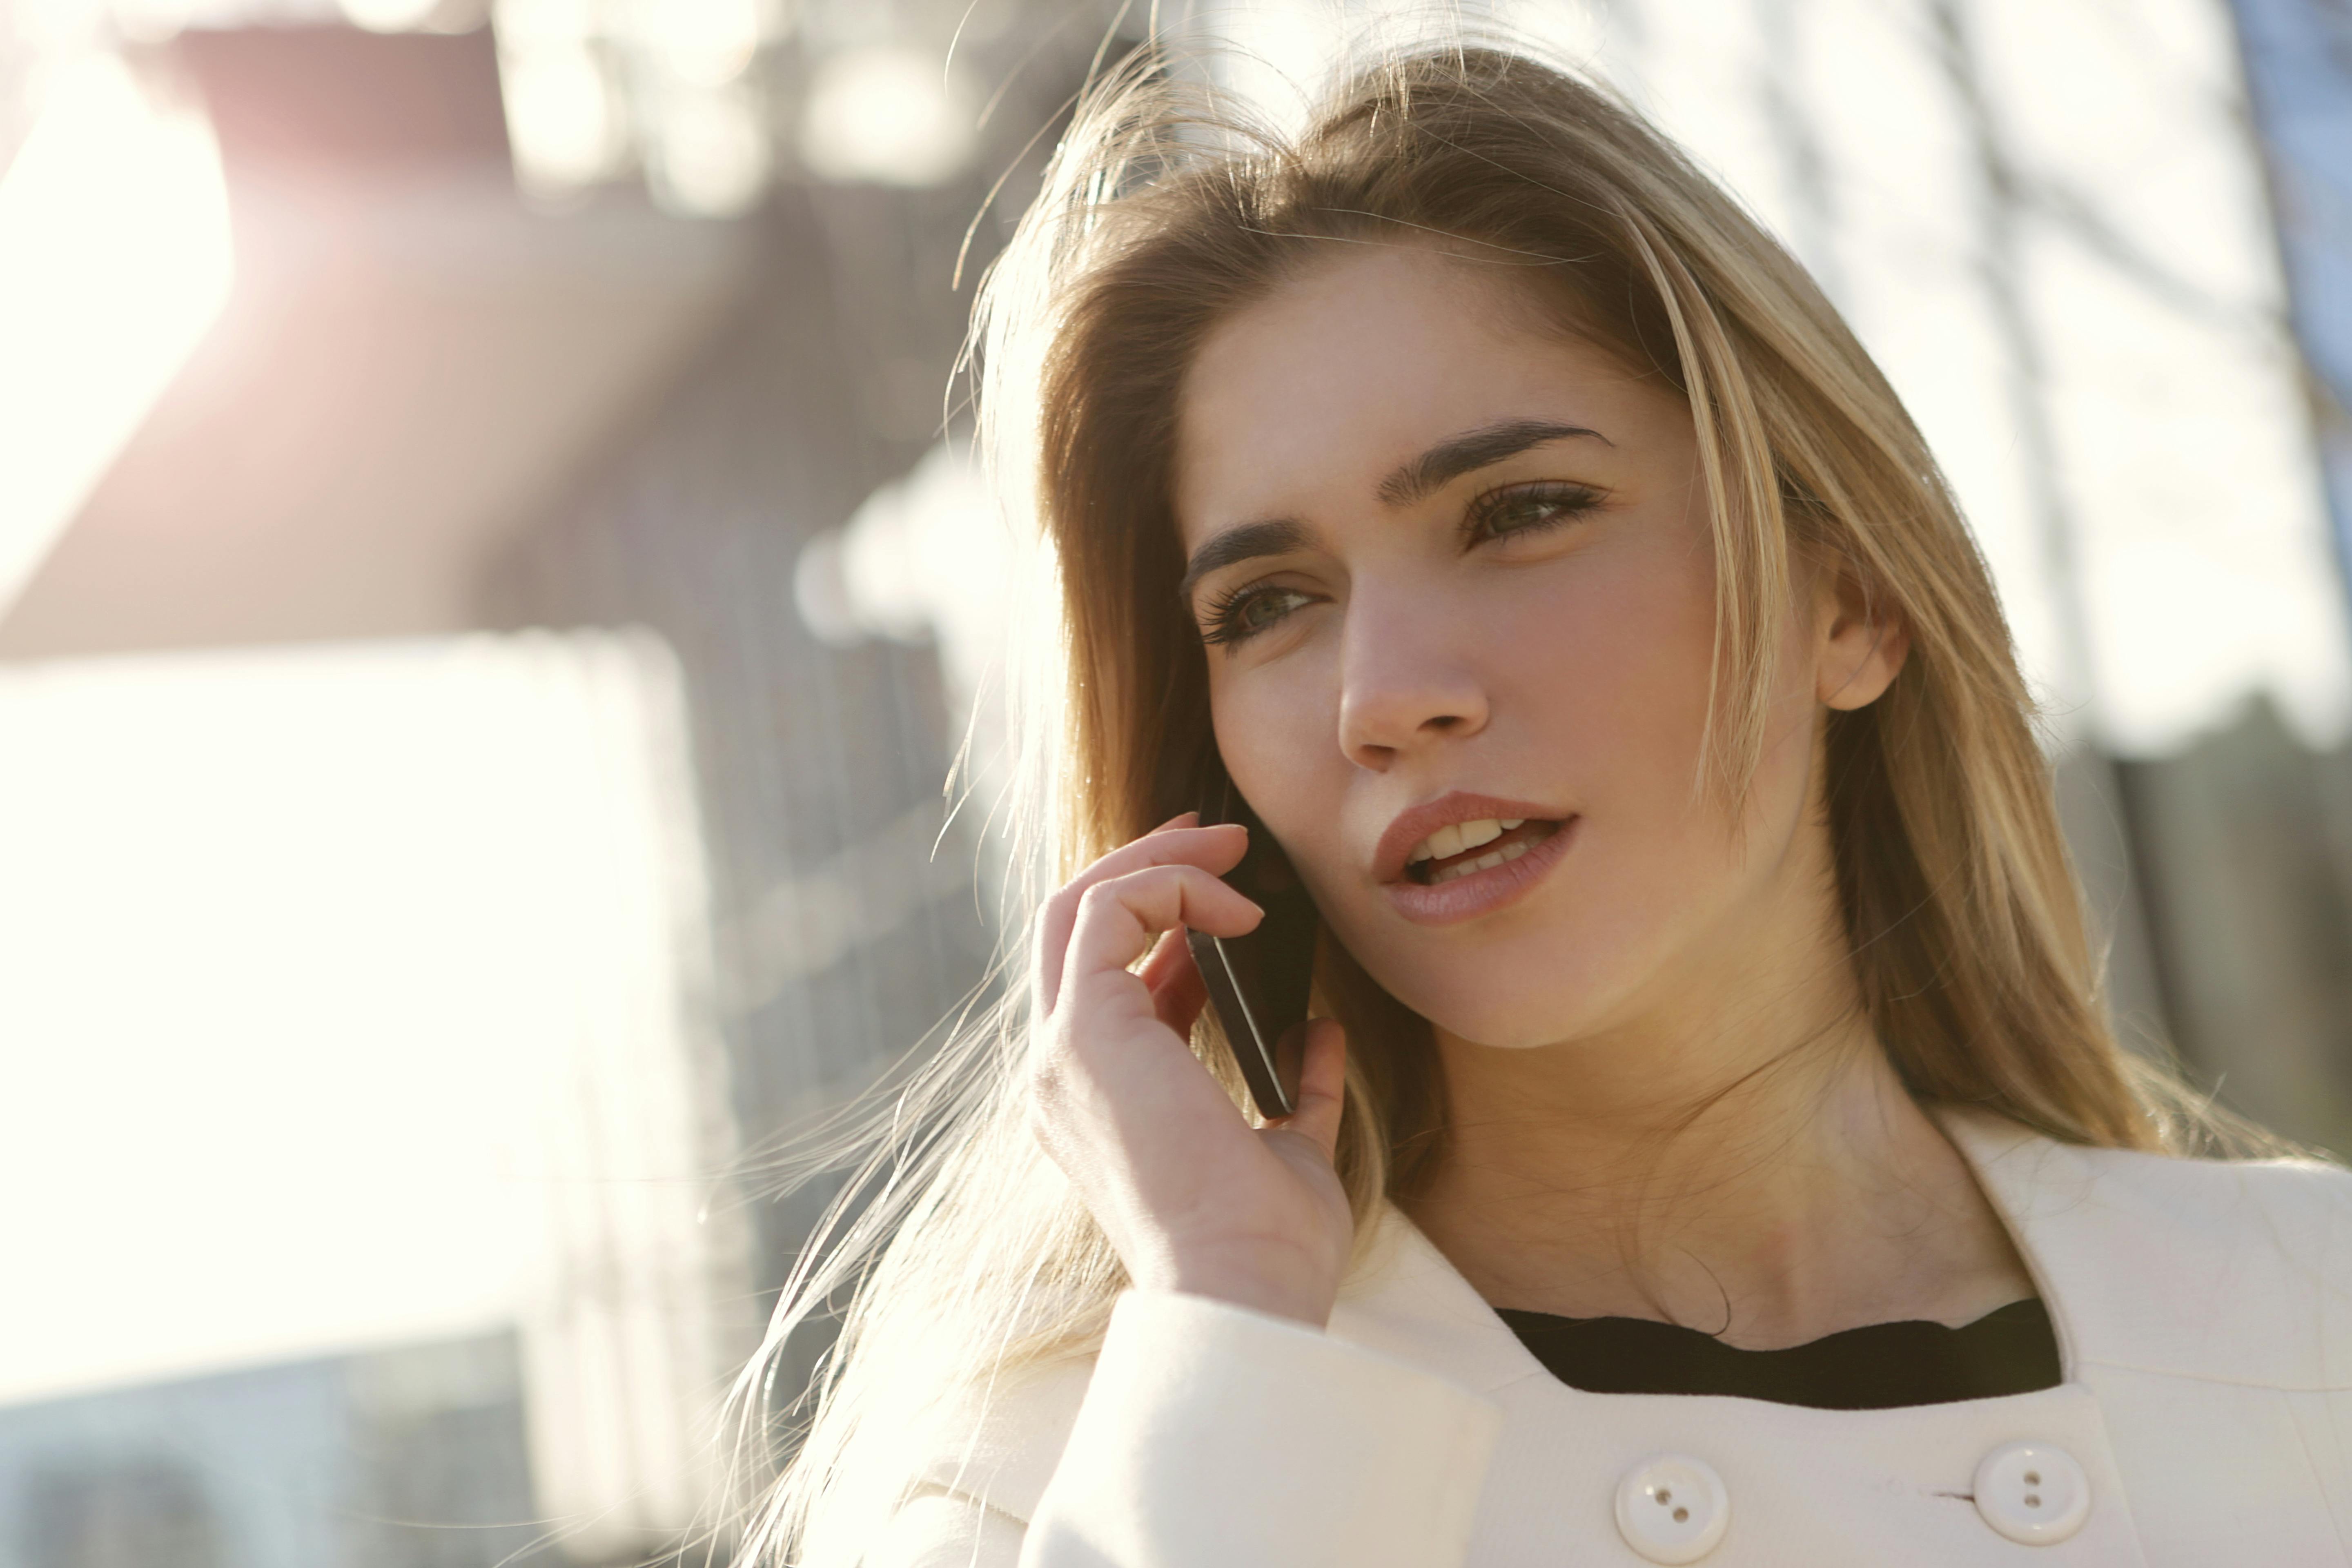 A woman looking bothered on the phone | Source: Pexels